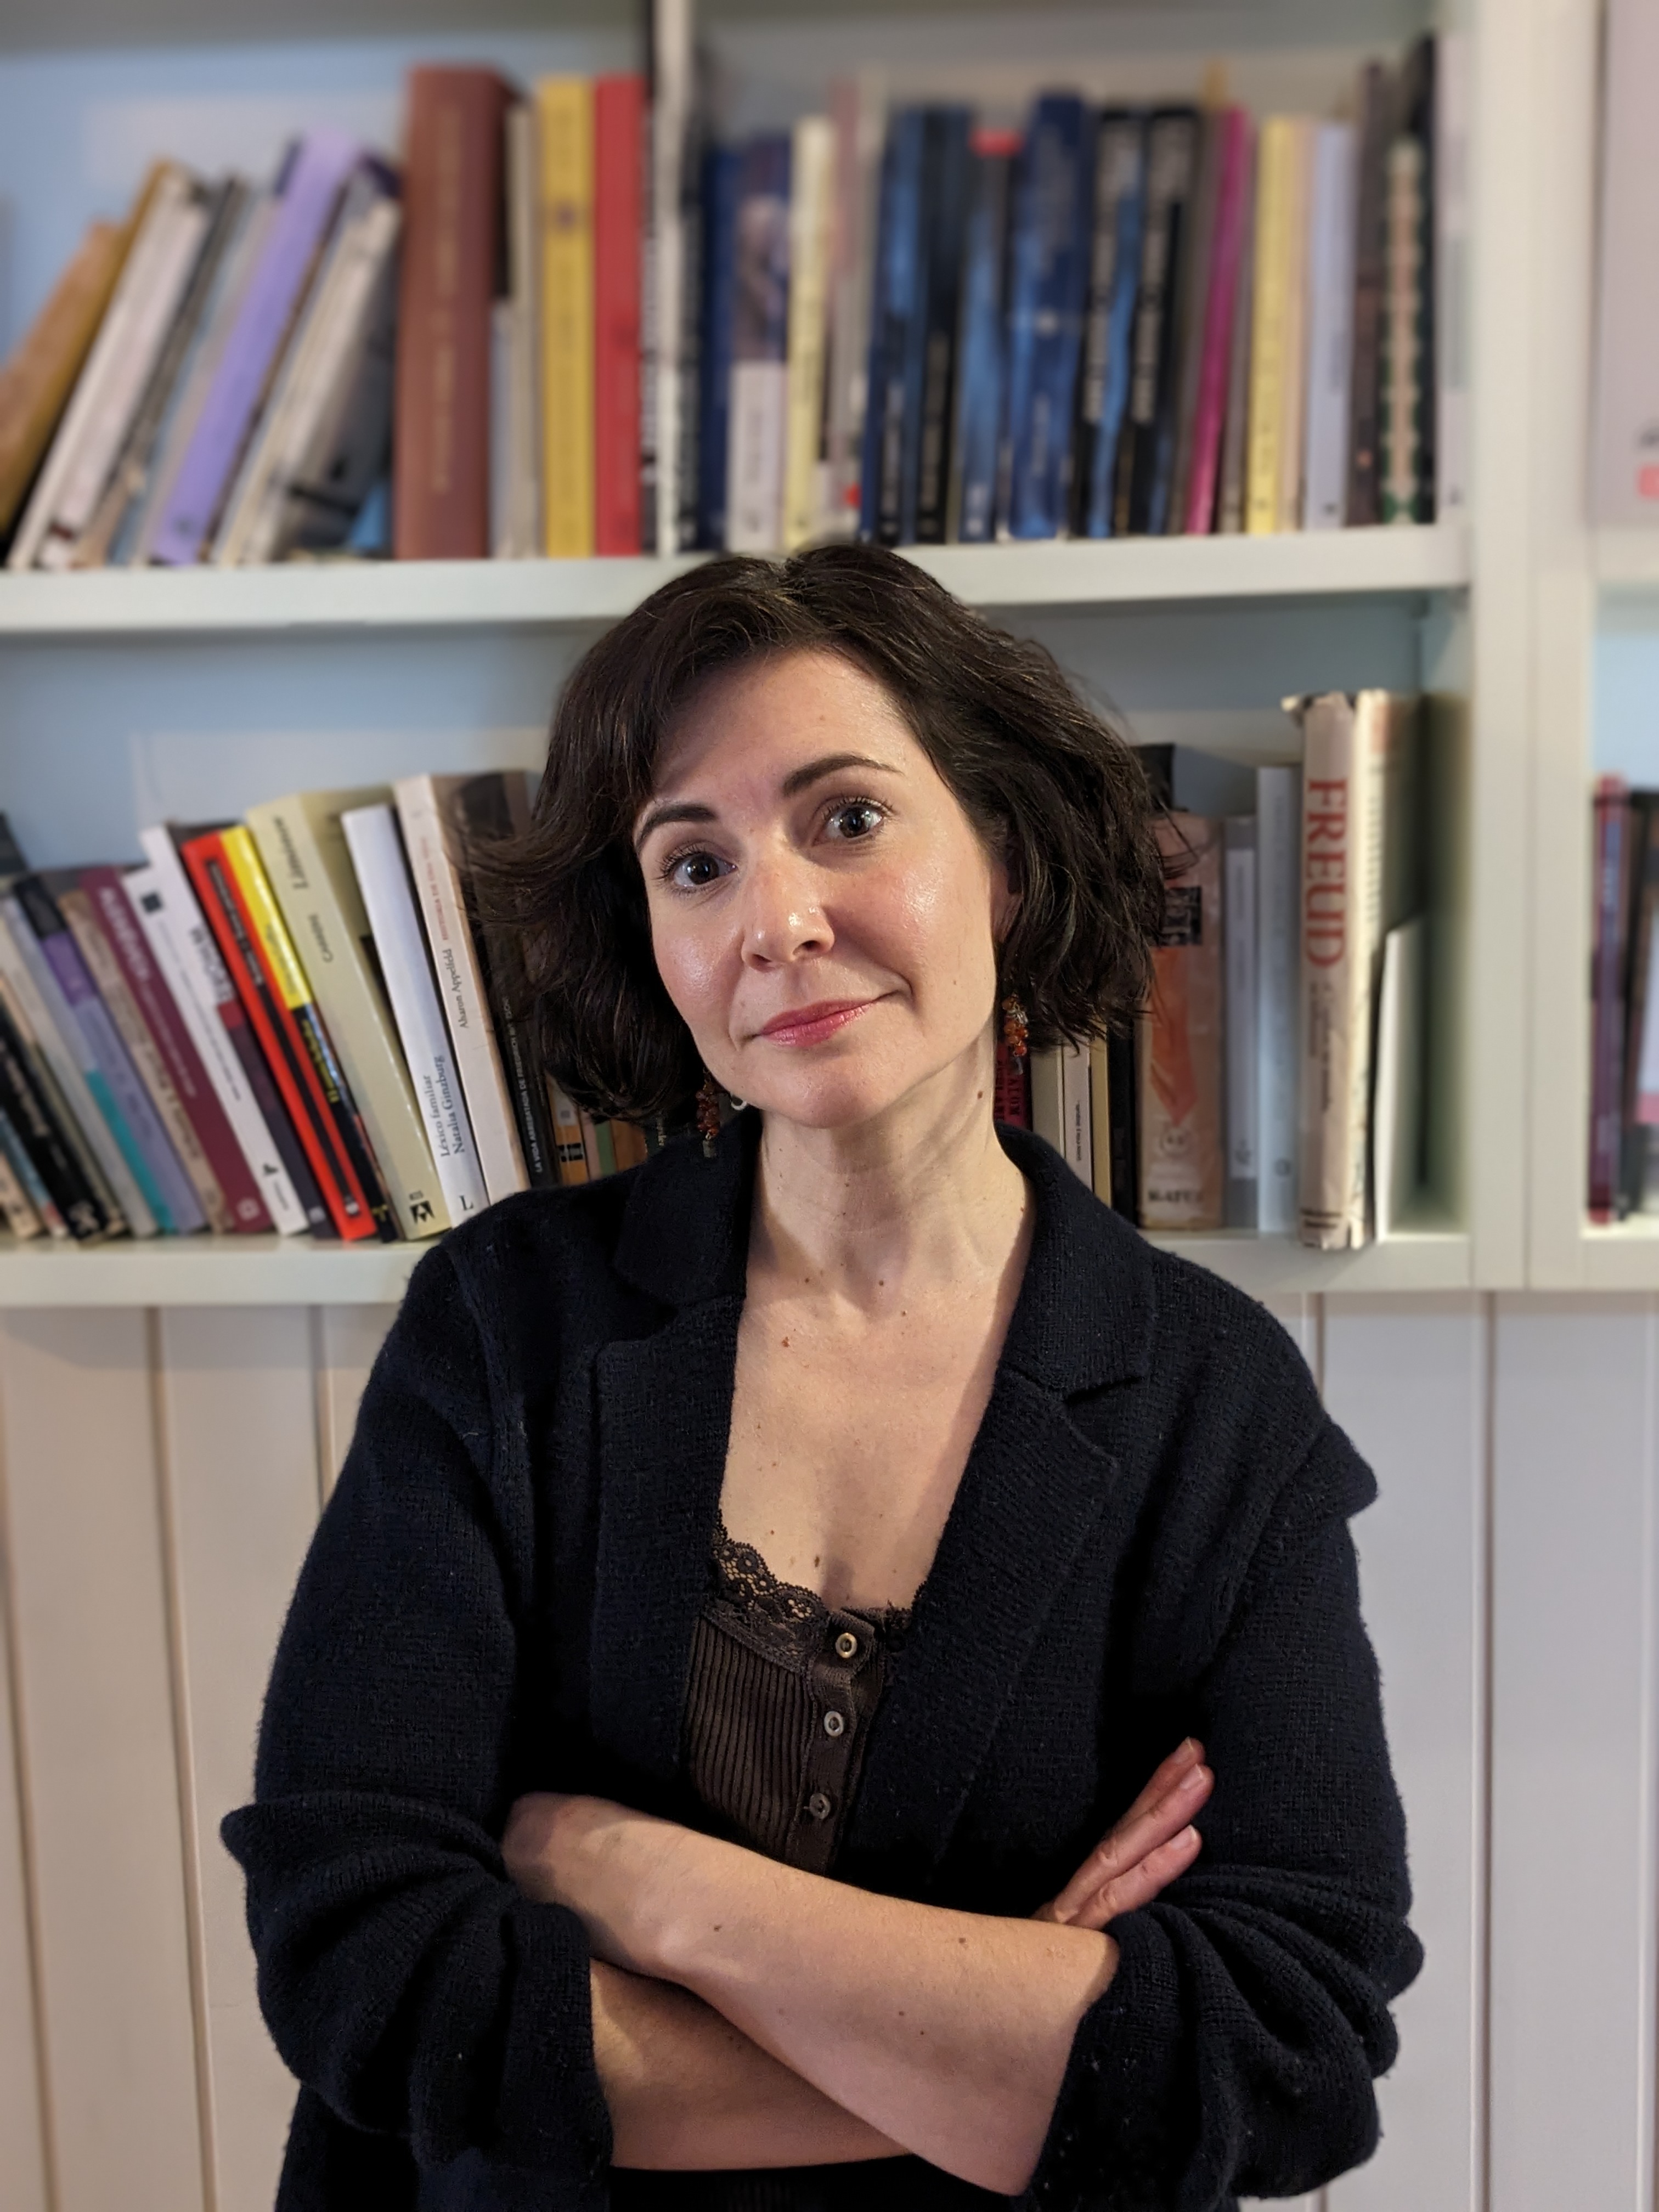 Dr Angy Cohen standing in front of bookshelves.